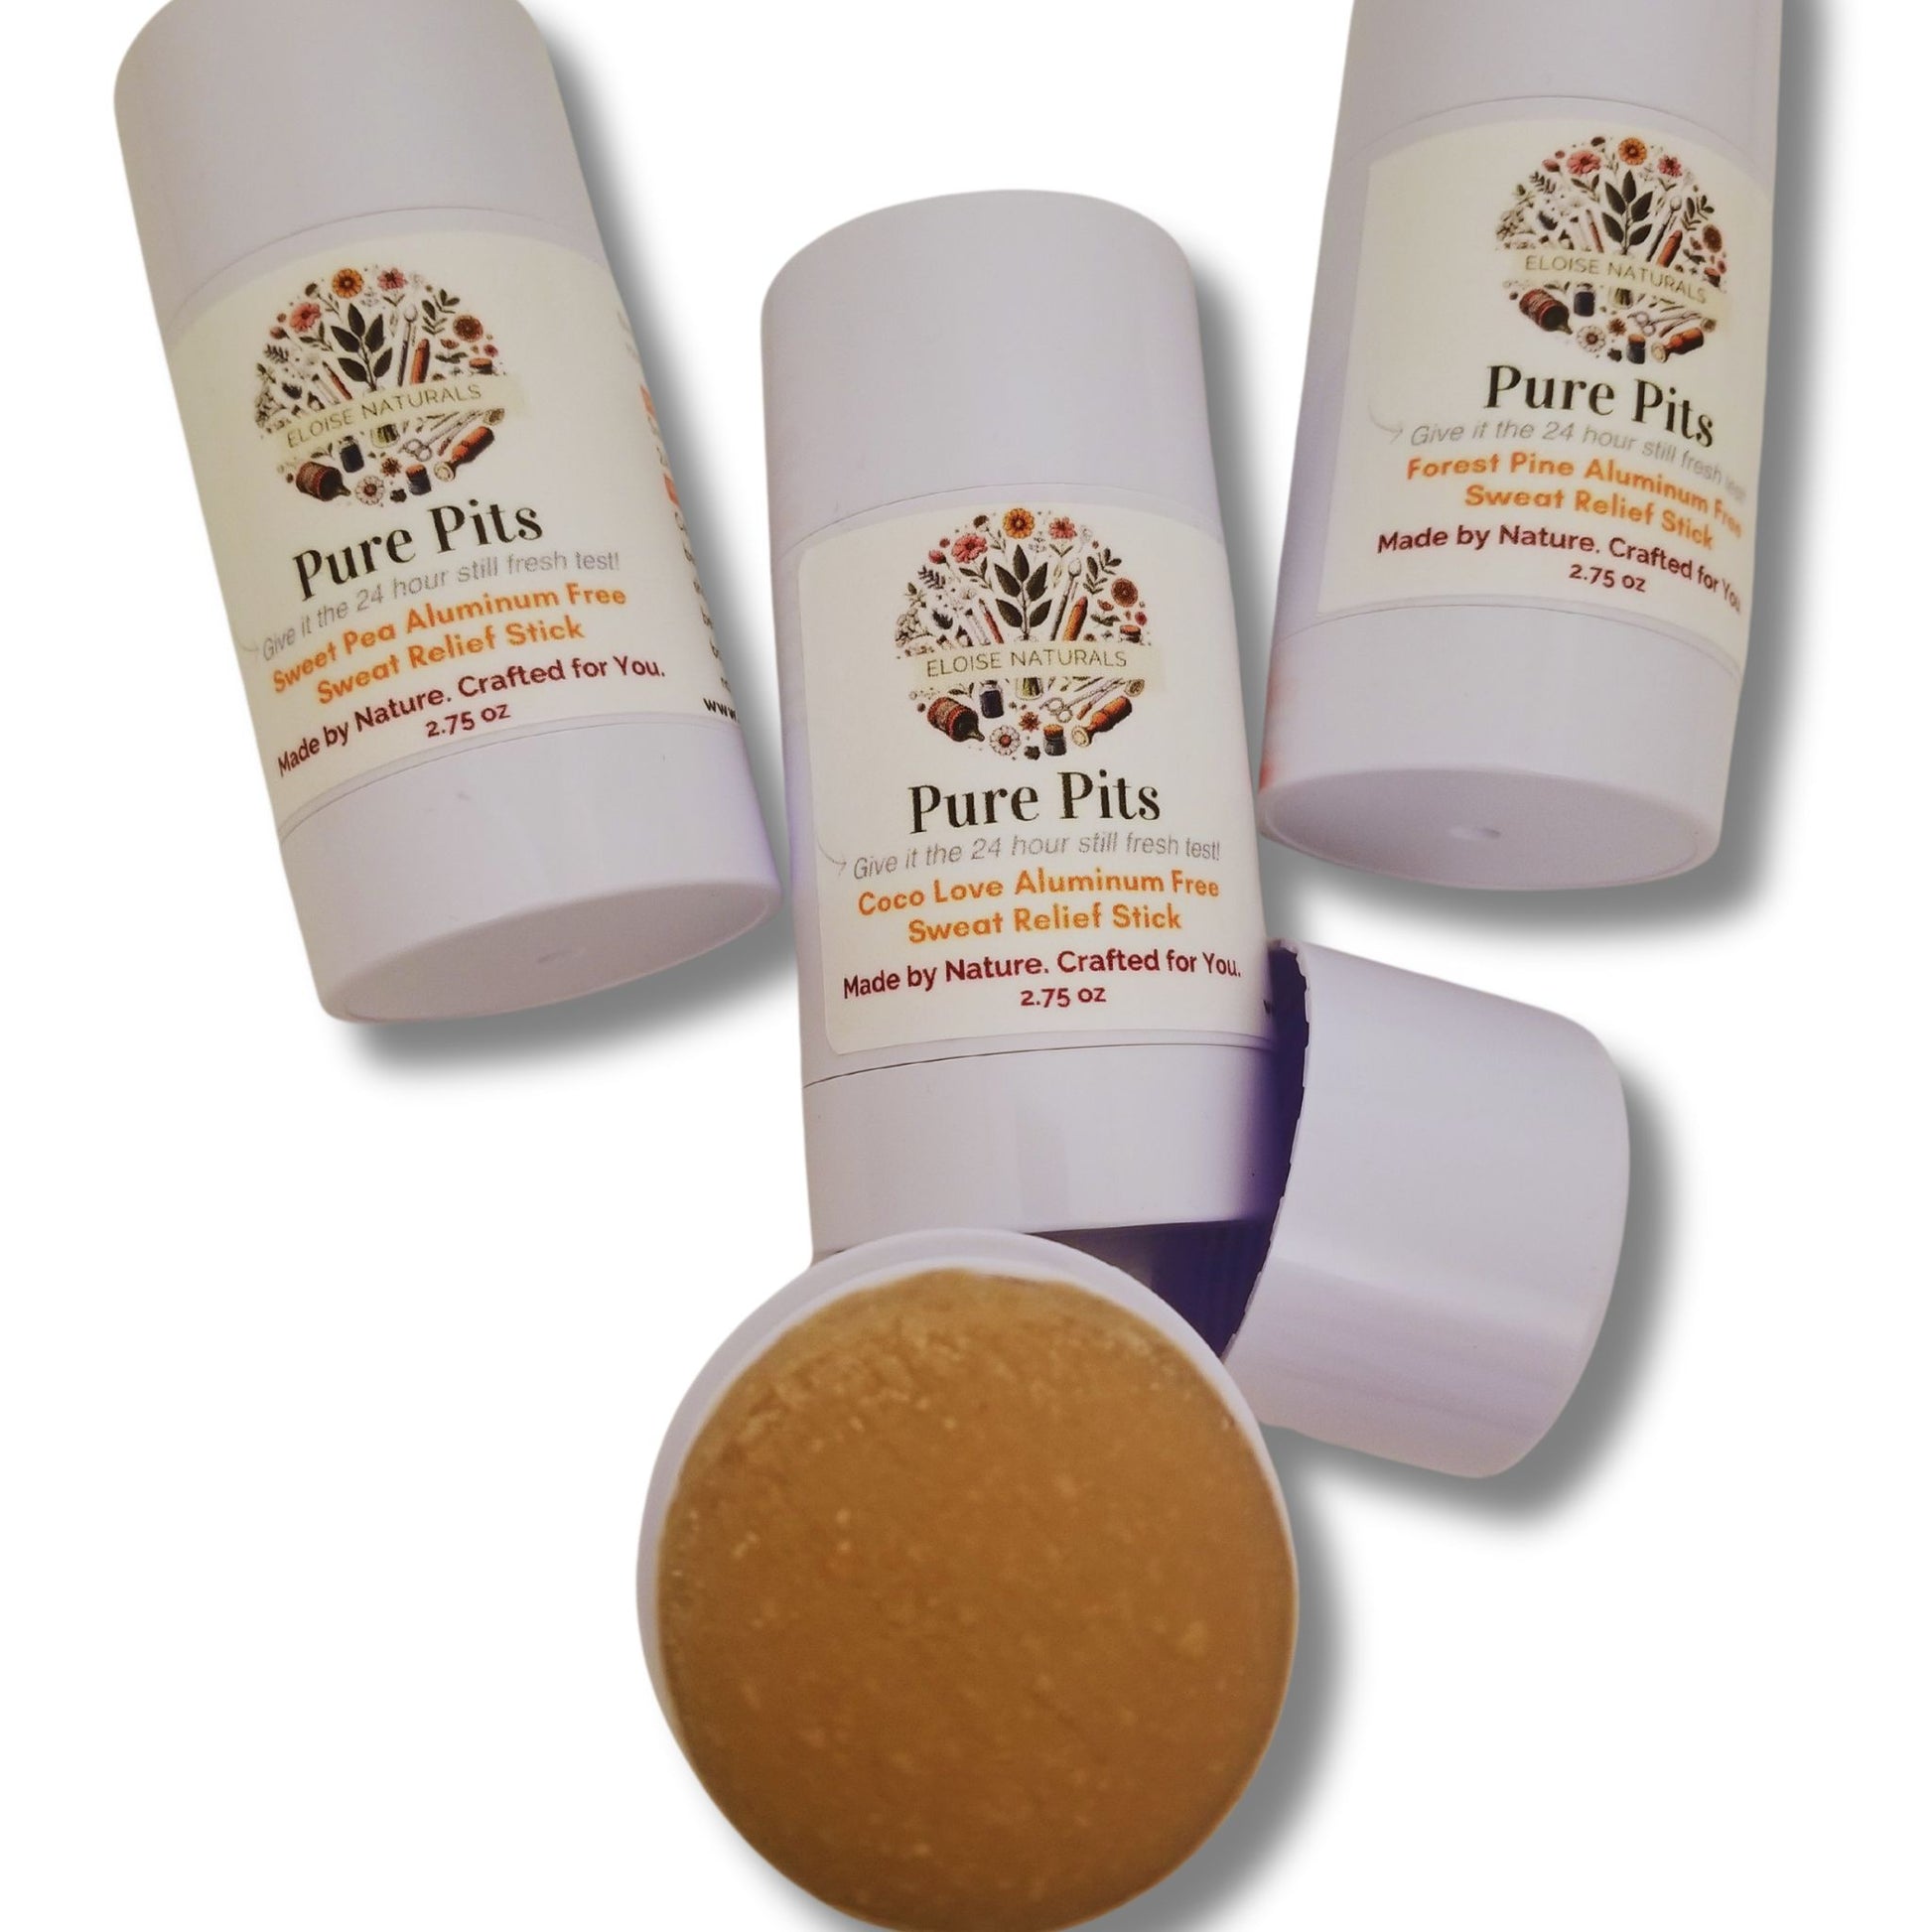 Pure Pits "Sweet Pea" Aluminum Free Sweat Relief Stick